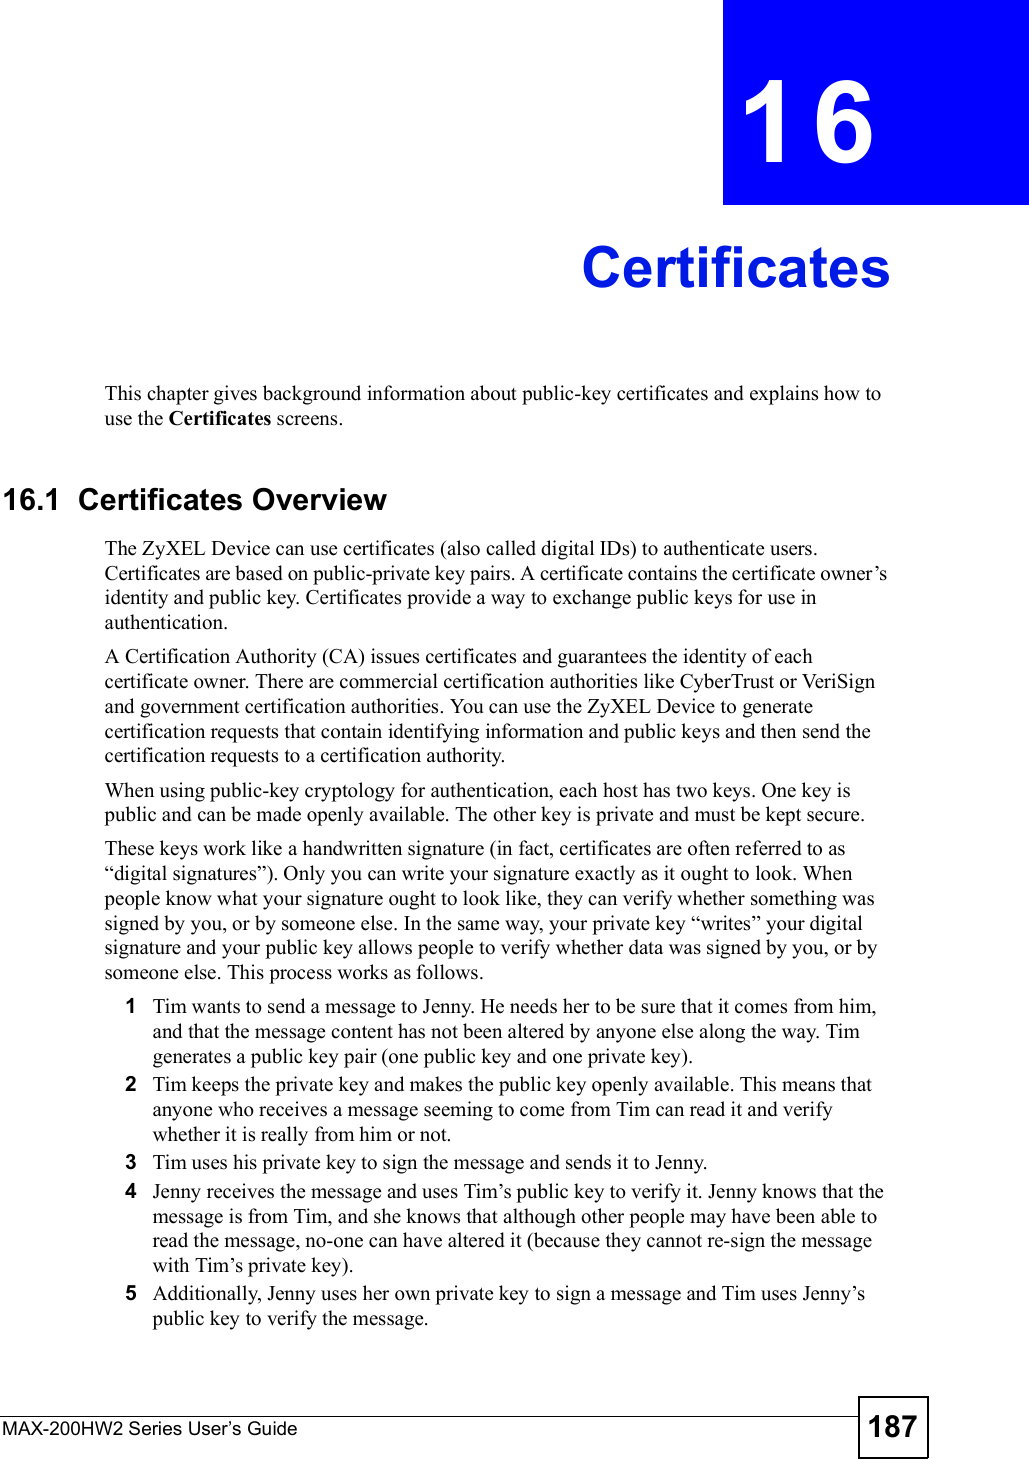 MAX-200HW2 Series User s Guide 187CHAPTER 16CertificatesThis chapter gives background information about public-key certificates and explains how to use the Certificates screens. 16.1  Certificates OverviewThe ZyXEL Device can use certificates (also called digital IDs) to authenticate users. Certificates are based on public-private key pairs. A certificate contains the certificate owner!s identity and public key. Certificates provide a way to exchange public keys for use in authentication.A Certification Authority (CA) issues certificates and guarantees the identity of each certificate owner. There are commercial certification authorities like CyberTrust or VeriSign and government certification authorities. You can use the ZyXEL Device to generate certification requests that contain identifying information and public keys and then send the certification requests to a certification authority. When using public-key cryptology for authentication, each host has two keys. One key is public and can be made openly available. The other key is private and must be kept secure. These keys work like a handwritten signature (in fact, certificates are often referred to as &quot;digital signatures#). Only you can write your signature exactly as it ought to look. When people know what your signature ought to look like, they can verify whether something was signed by you, or by someone else. In the same way, your private key &quot;writes# your digital signature and your public key allows people to verify whether data was signed by you, or by someone else. This process works as follows.1Tim wants to send a message to Jenny. He needs her to be sure that it comes from him, and that the message content has not been altered by anyone else along the way. Tim generates a public key pair (one public key and one private key). 2Tim keeps the private key and makes the public key openly available. This means that anyone who receives a message seeming to come from Tim can read it and verify whether it is really from him or not. 3Tim uses his private key to sign the message and sends it to Jenny.4Jenny receives the message and uses Tim!s public key to verify it. Jenny knows that the message is from Tim, and she knows that although other people may have been able to read the message, no-one can have altered it (because they cannot re-sign the message with Tim!s private key).5Additionally, Jenny uses her own private key to sign a message and Tim uses Jenny!s public key to verify the message.